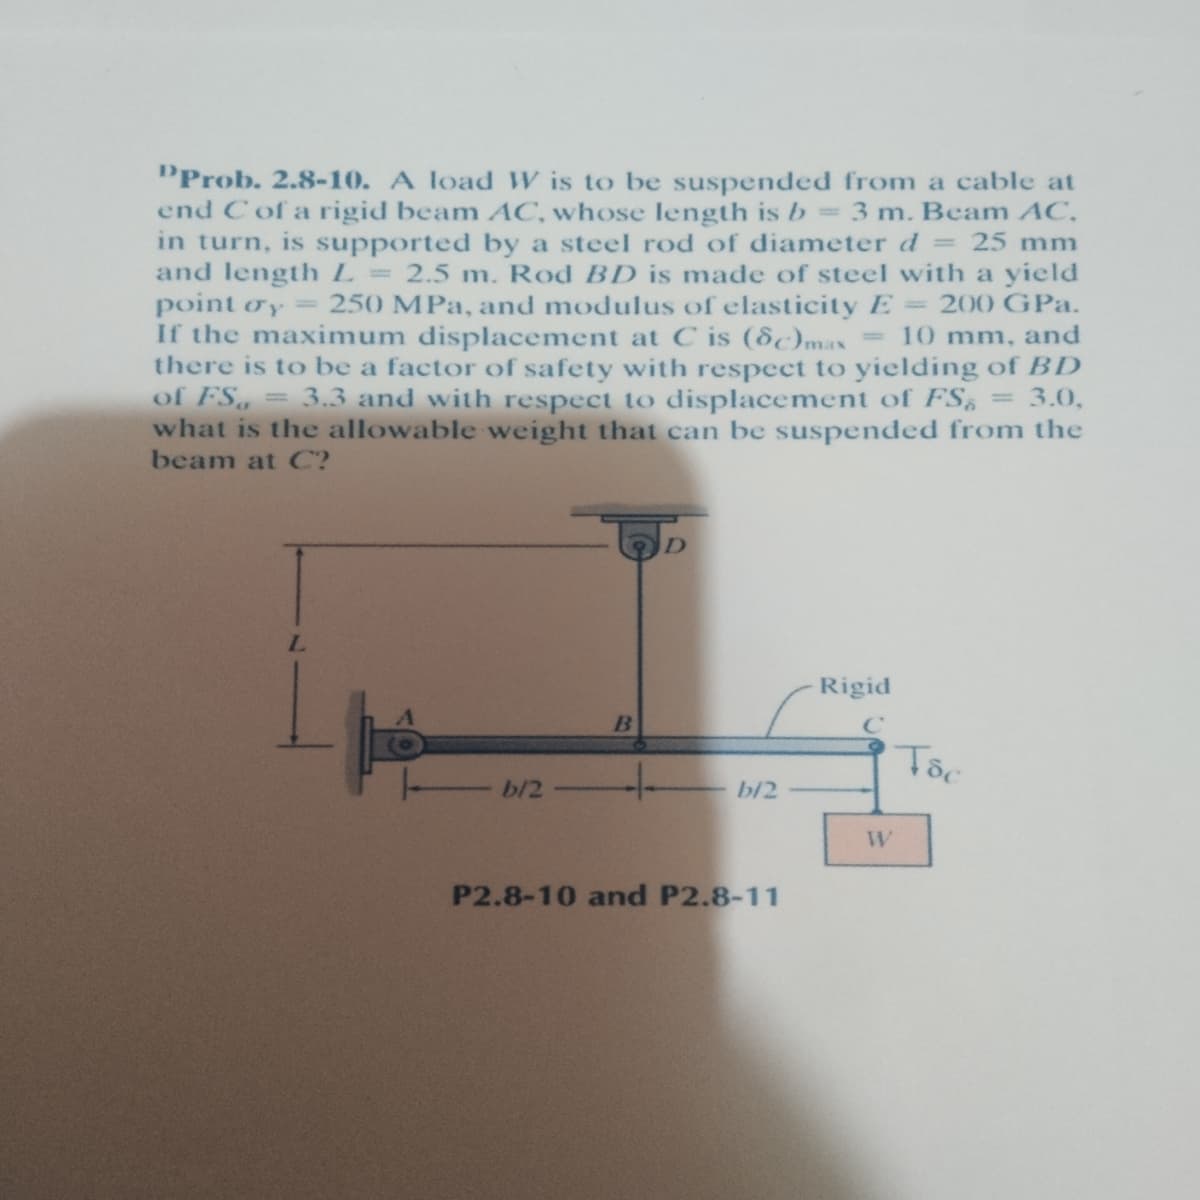 PProb. 2.8-10. A load W is to be suspended from a cable at
end C of a rigid beam AC, whose length is b= 3 m. Beam AC,
in turn, is supported by a steel rod of diameter d = 25 mm
and length L = 2.5 m. Rod BD is made of steel with a yield
point oy 250 MPa, and modulus of elasticity E= 200 GPa.
If the maximum displacement at C is (8c)max
there is to be a factor of safety with respect to yielding of BD
of FS, = 3.3 and with respect to displacement of FS, = 3.0,
what is the allowable weight that can be suspended from the
beam at C?
- 10 mm, and
D
Rigid
-
b/2
b/2
W
P2.8-10 and P2.8-11
